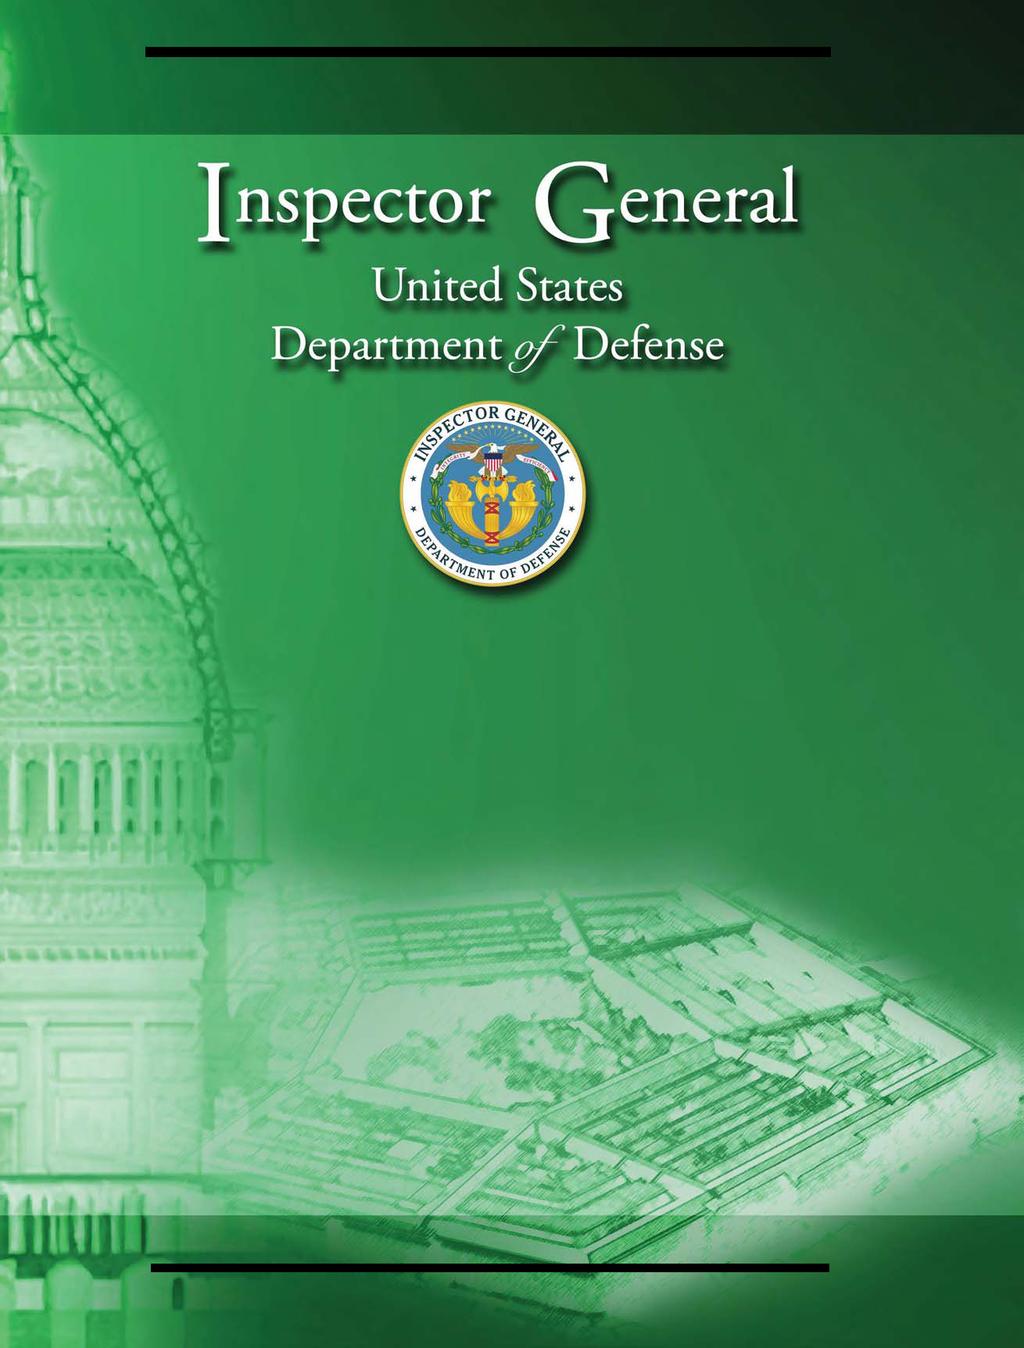 H08L107249100 July 10, 2009 ALLEGED MISCONDUCT: GENERAL T. MICHAEL MOSELEY FORMER CHIEF OF STAFF, U.S. AIR FORCE Warning The enclosed document(s) is (are) the property of the Department of Defense, Office of Inspector General.